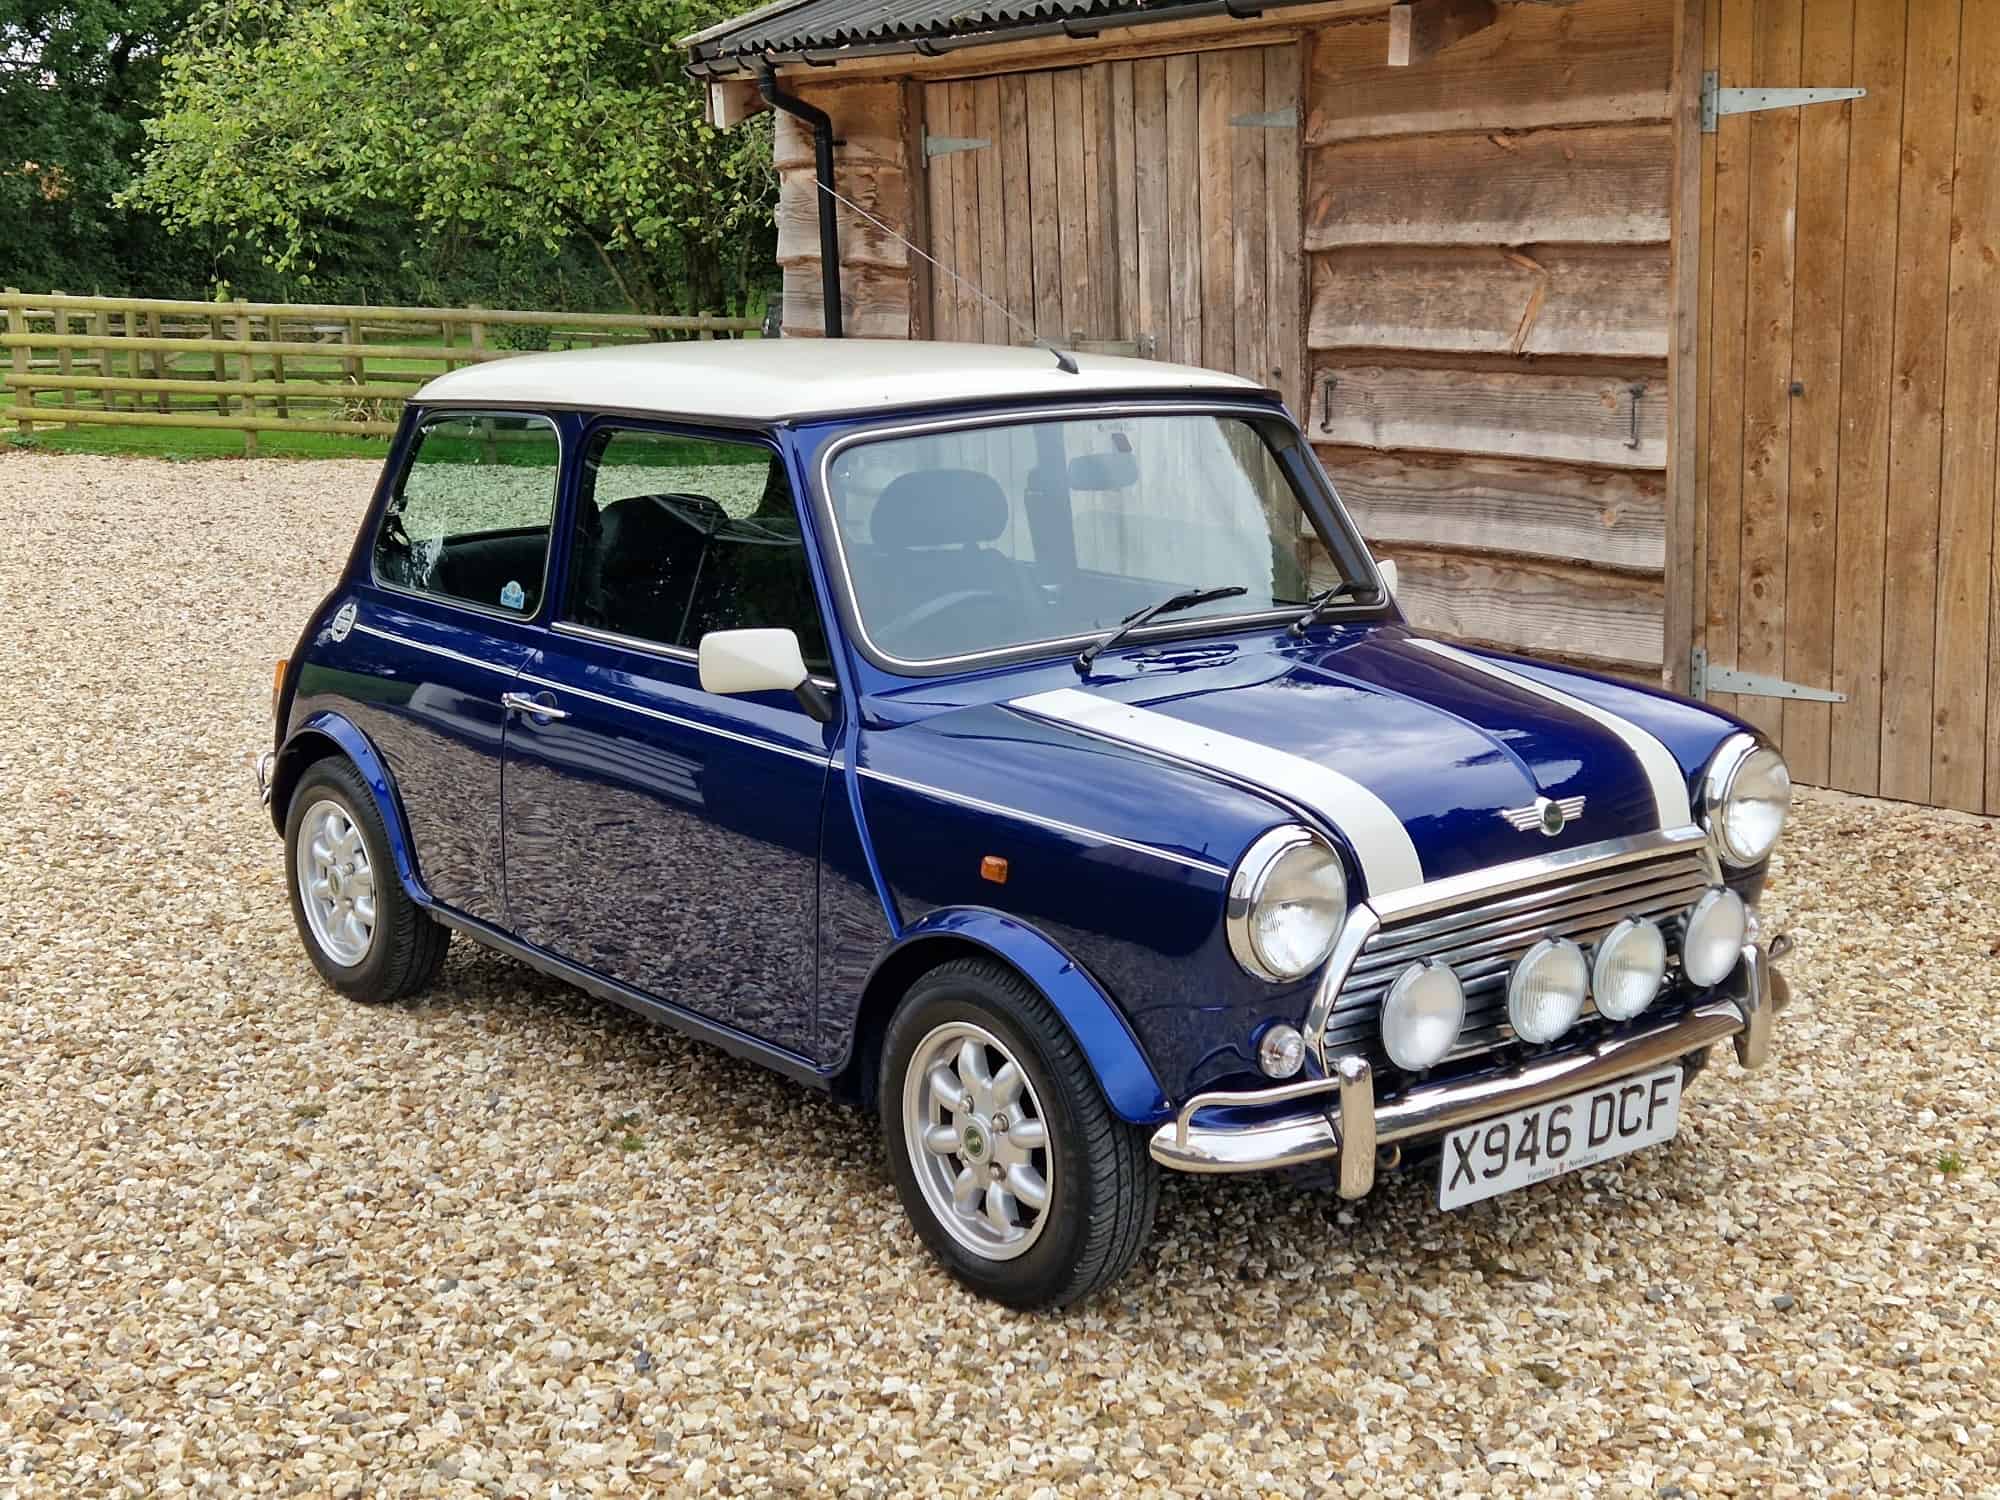 ** NOW SOLD ** 2000 Rover Mini Cooper Last Edition On Just 16300 Miles From New!!